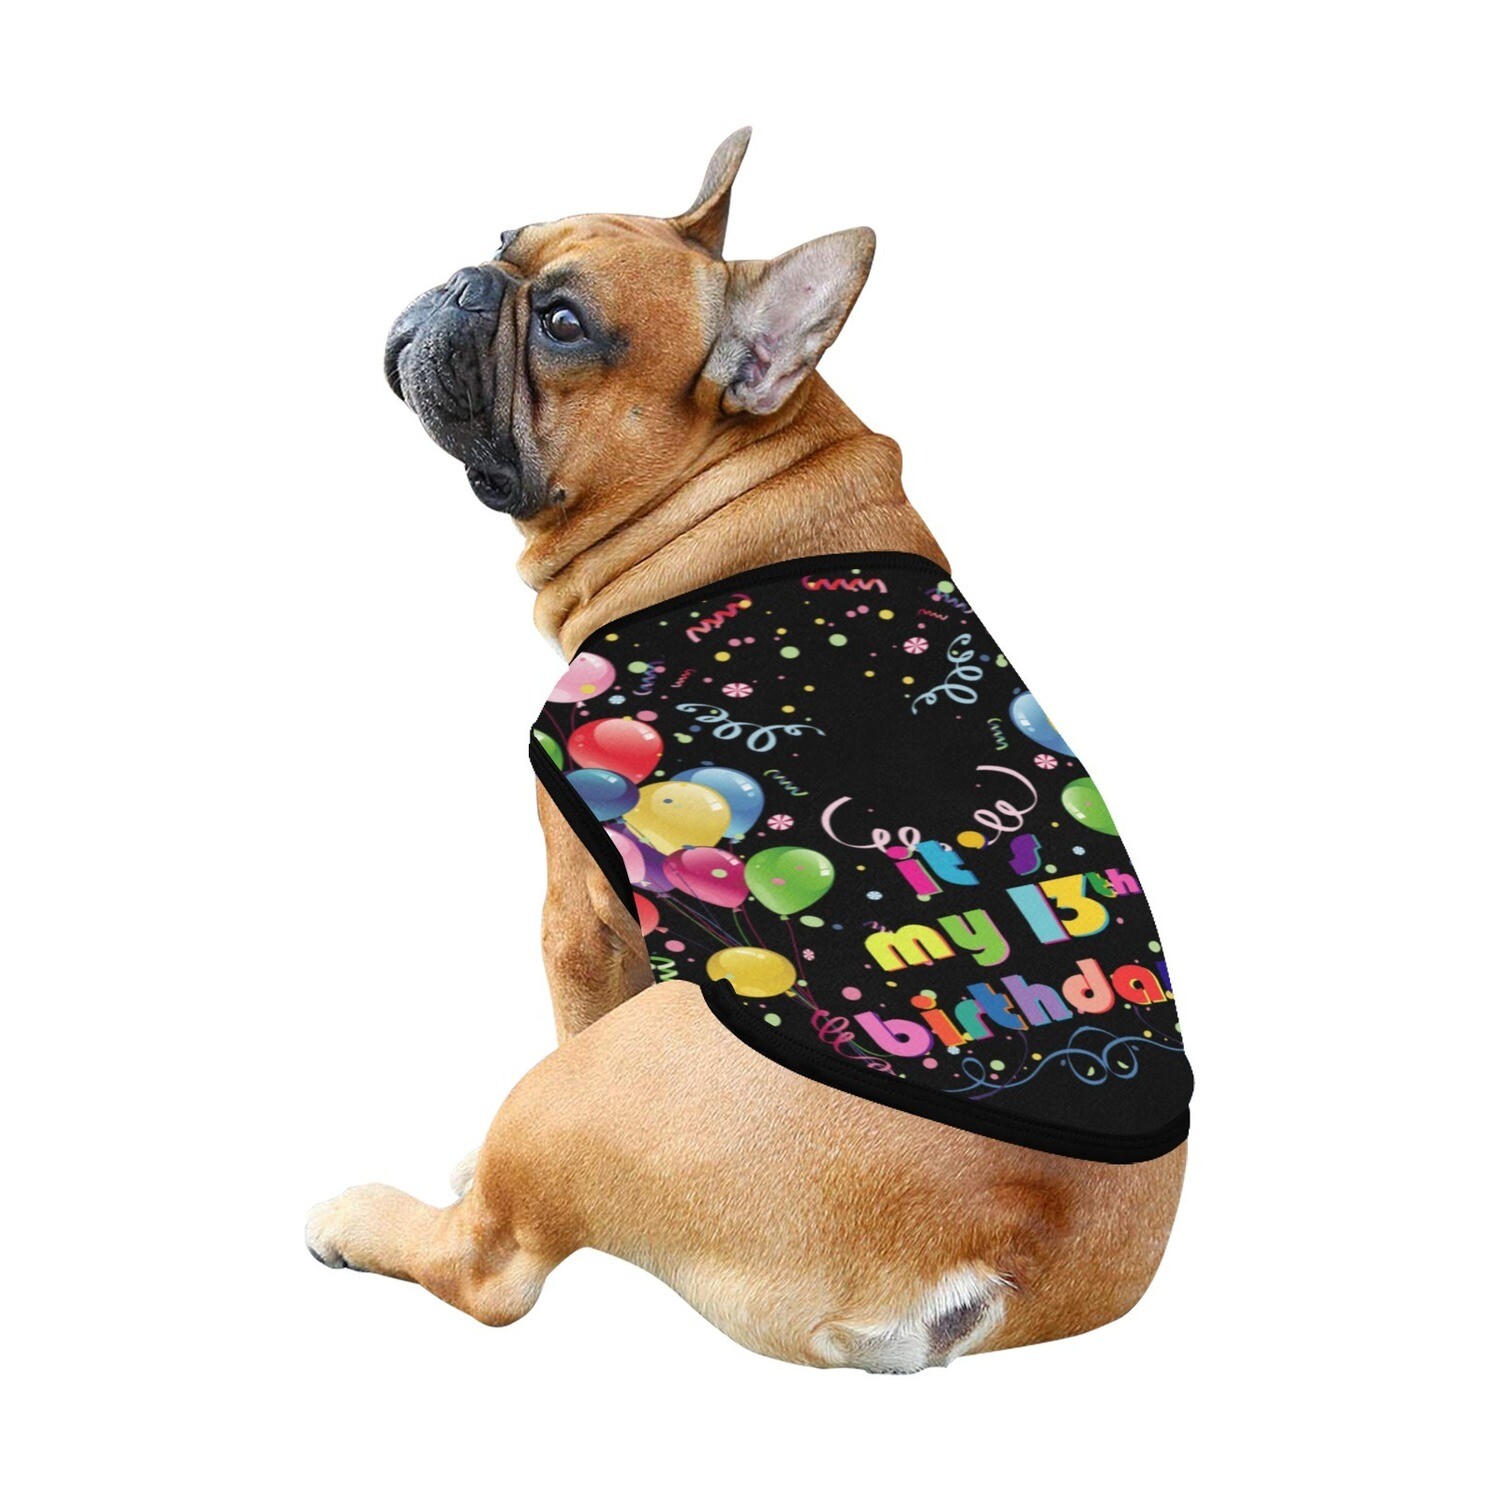 🐕🎂Personalize customize It's my Birthday dog t-shirt, Dog Tank Top, Dog shirt, Dog clothes, Dog clothing, Dog apparel, Gift for dogs, custom Gift